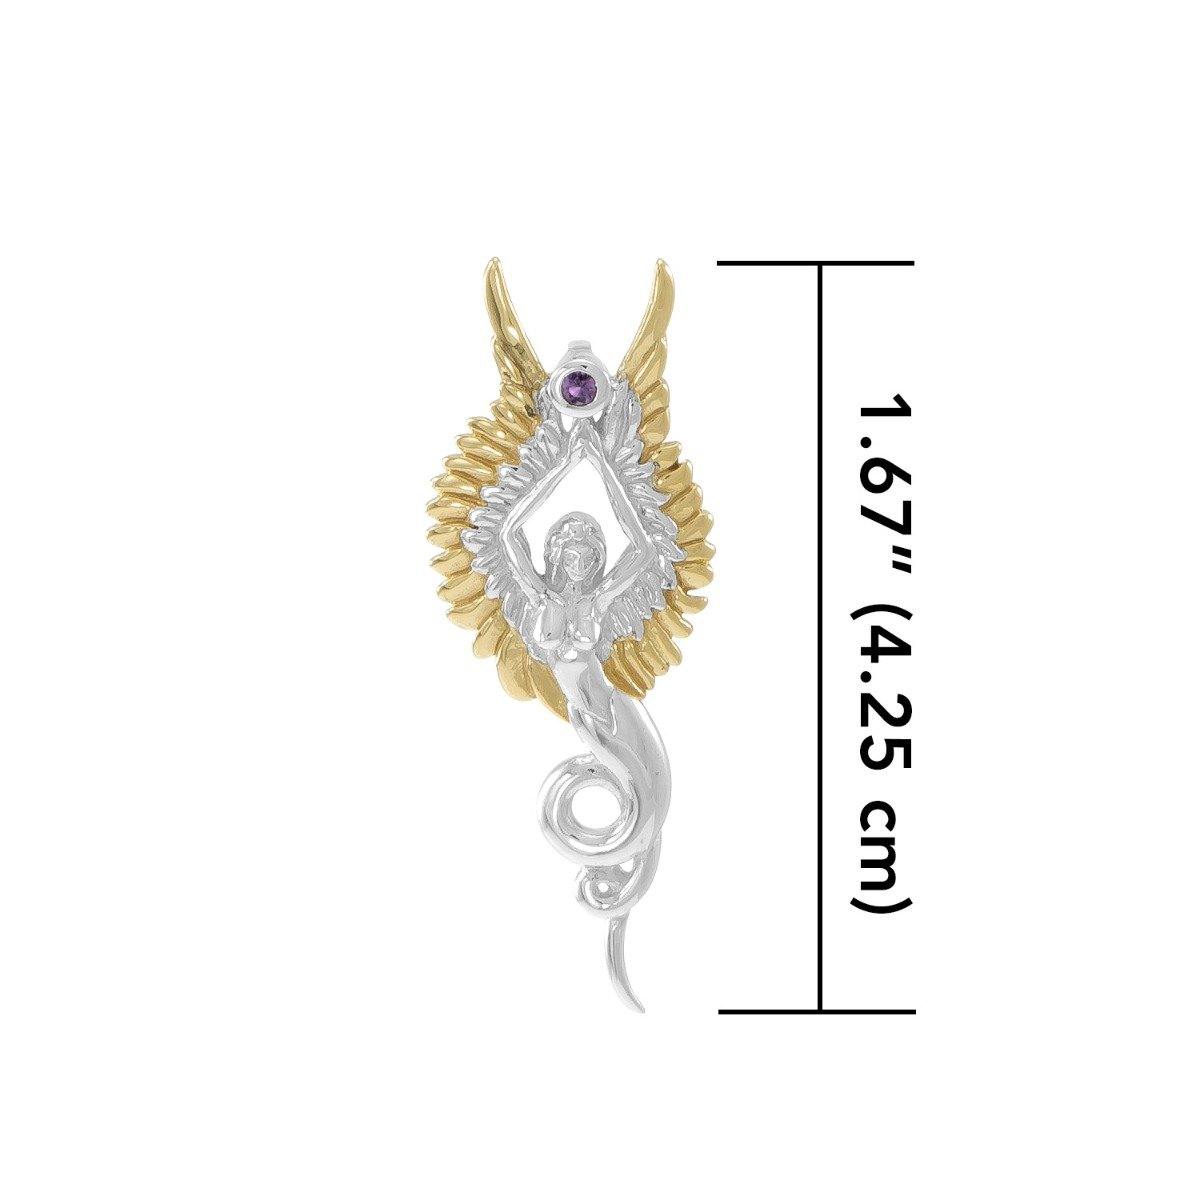 Captured by the Grace of the Angel Phoenix ~ Silver and 18K Gold Accent Jewelry Pendant with Amethyst MPD3266 Pendant